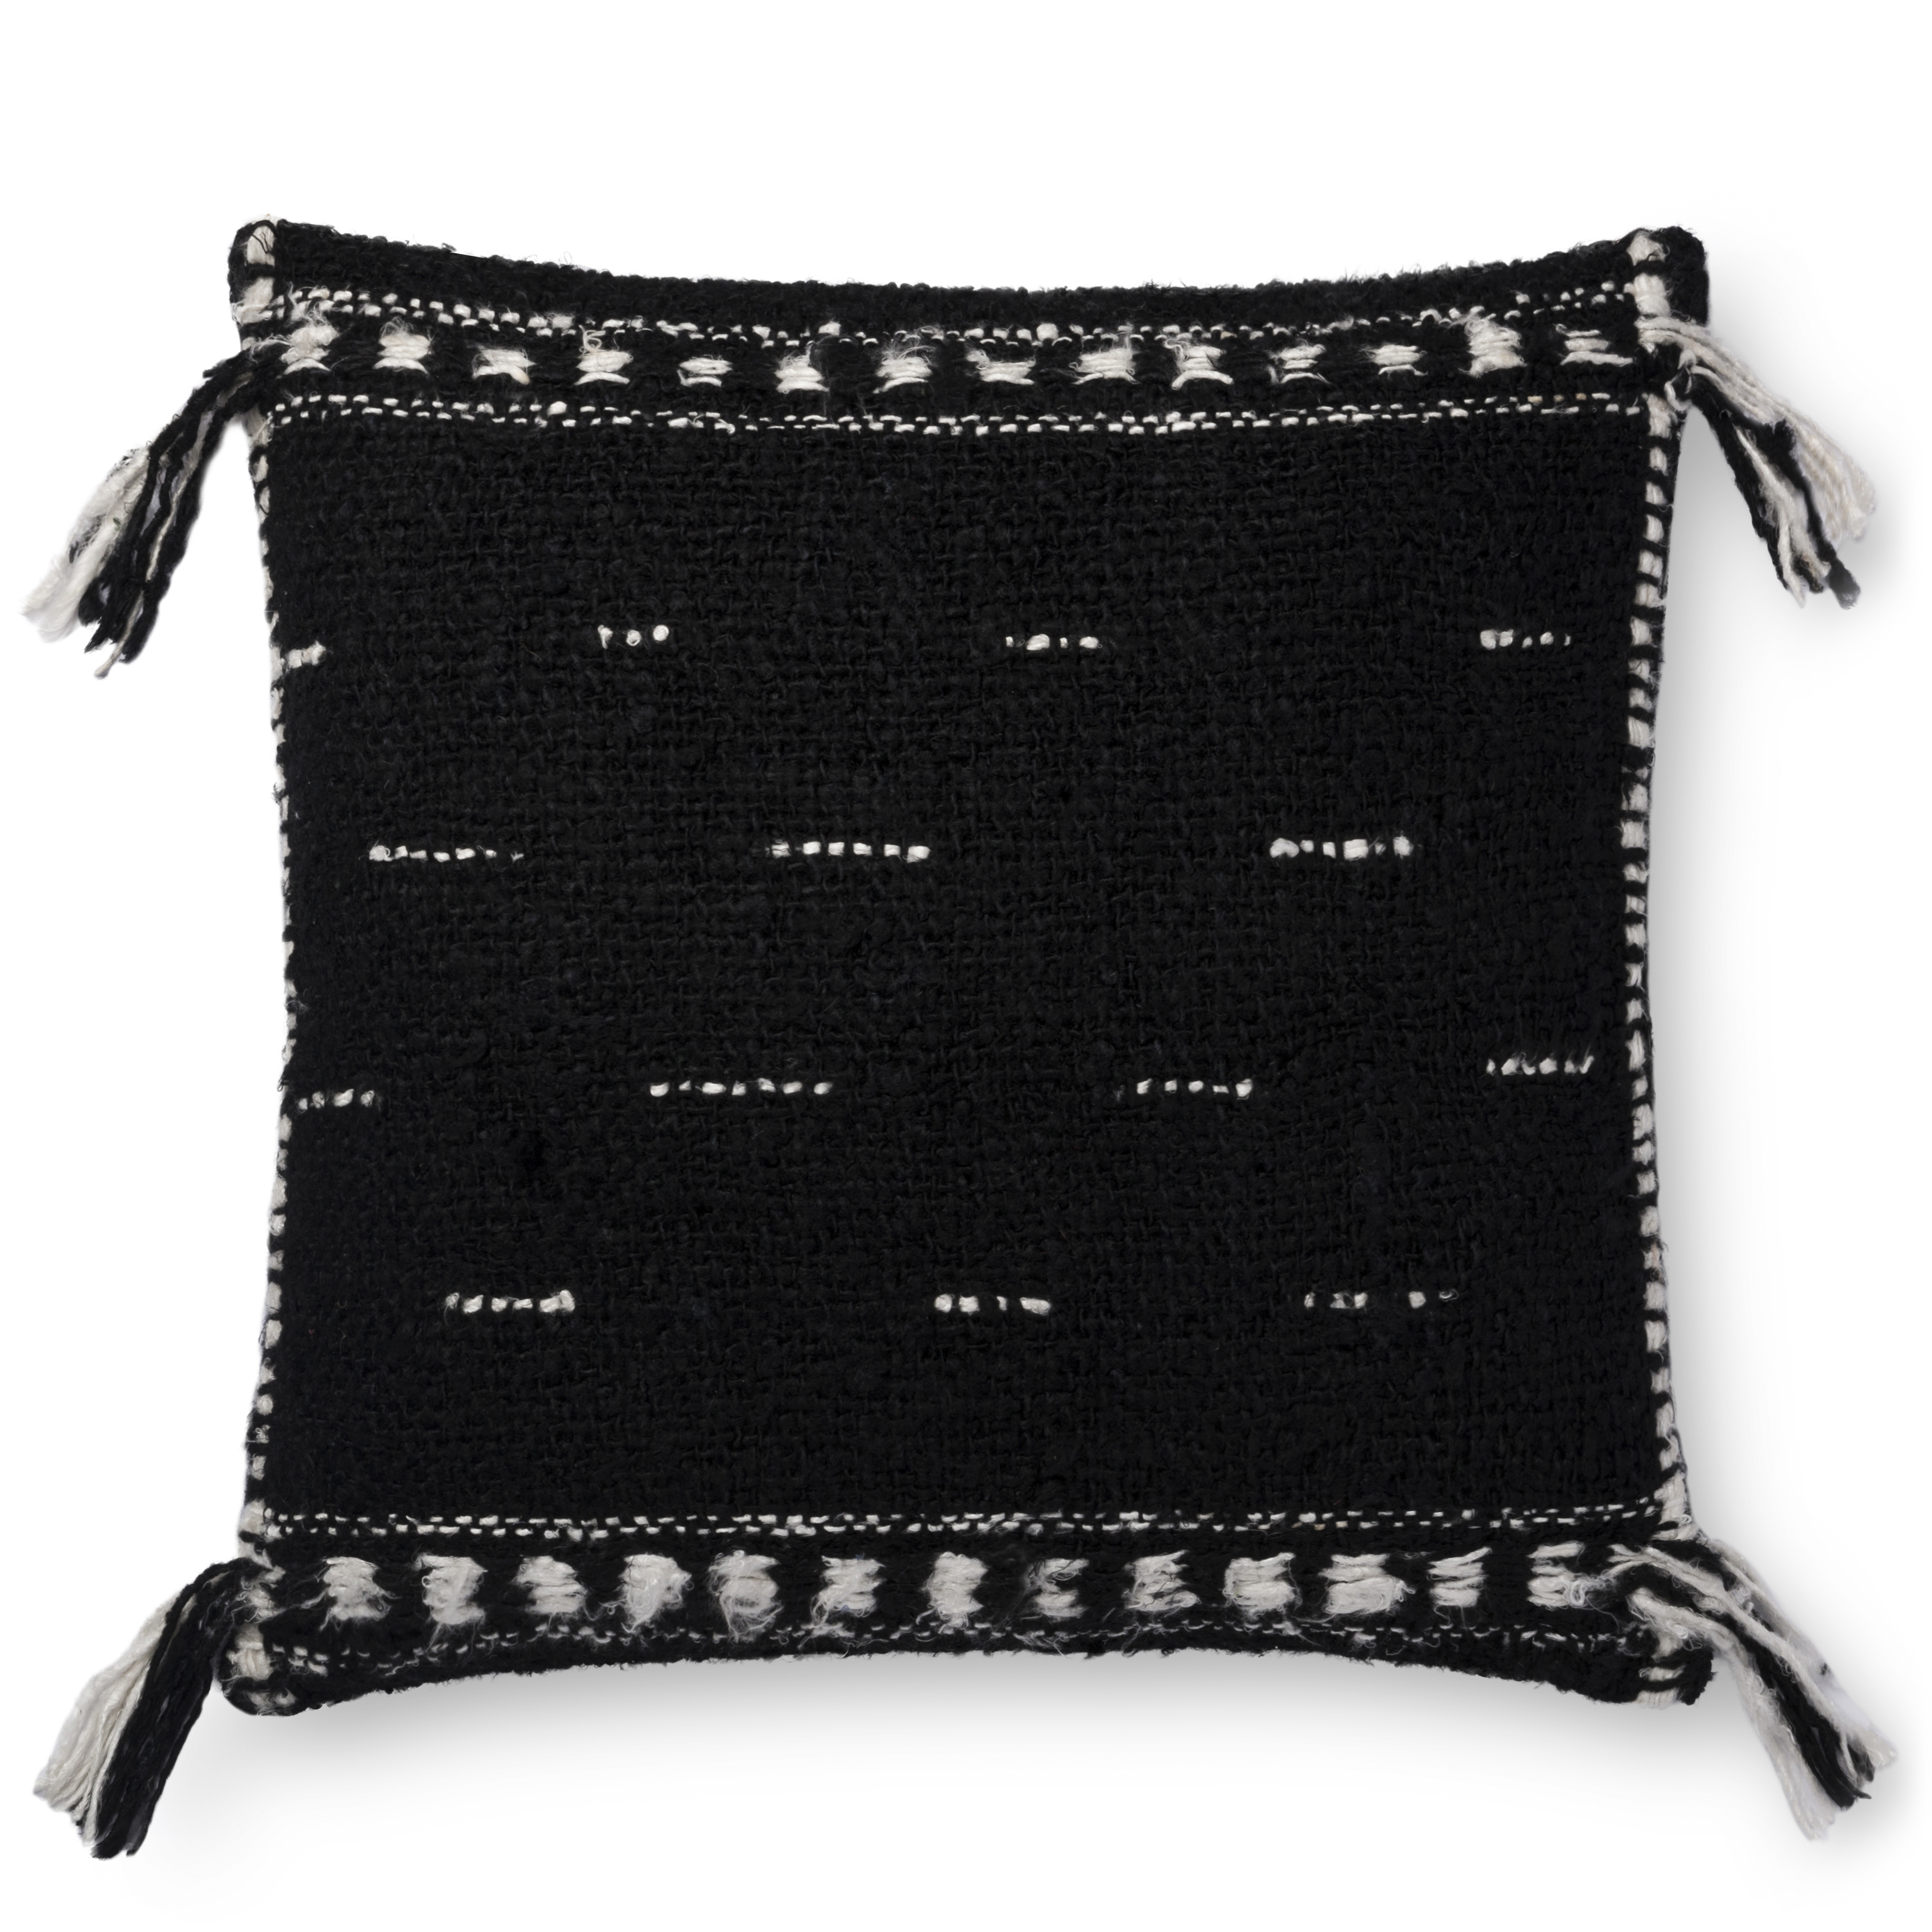 Justina Blakeney x Loloi PILLOWS P0661 Black 22" x 22" Cover Only - Image 0